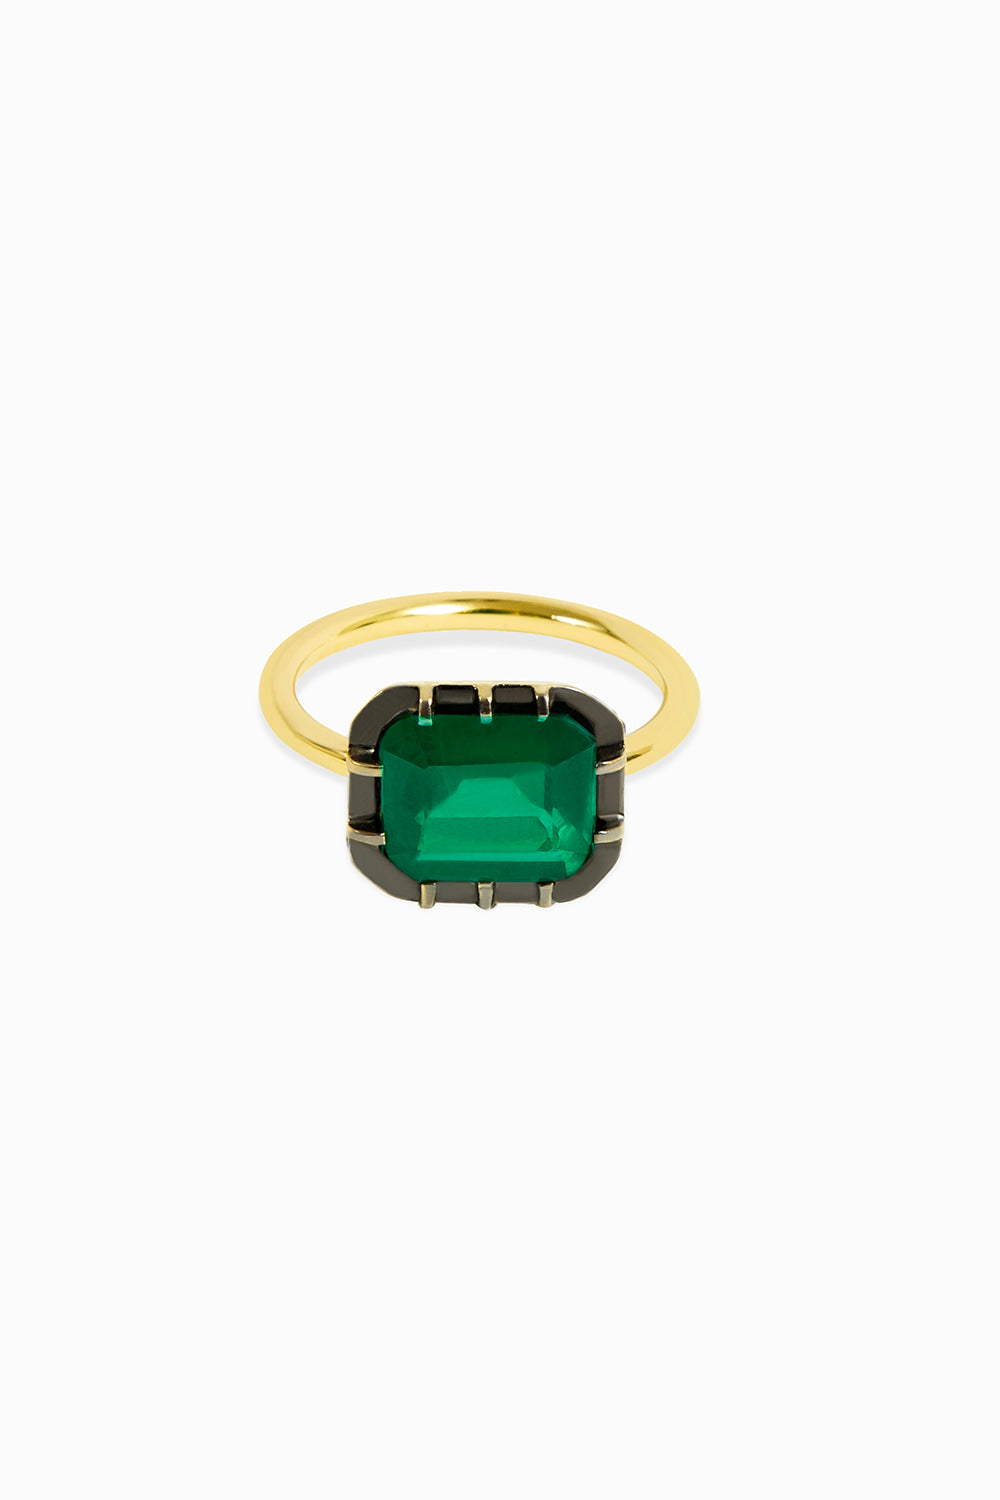 The Emerald ring